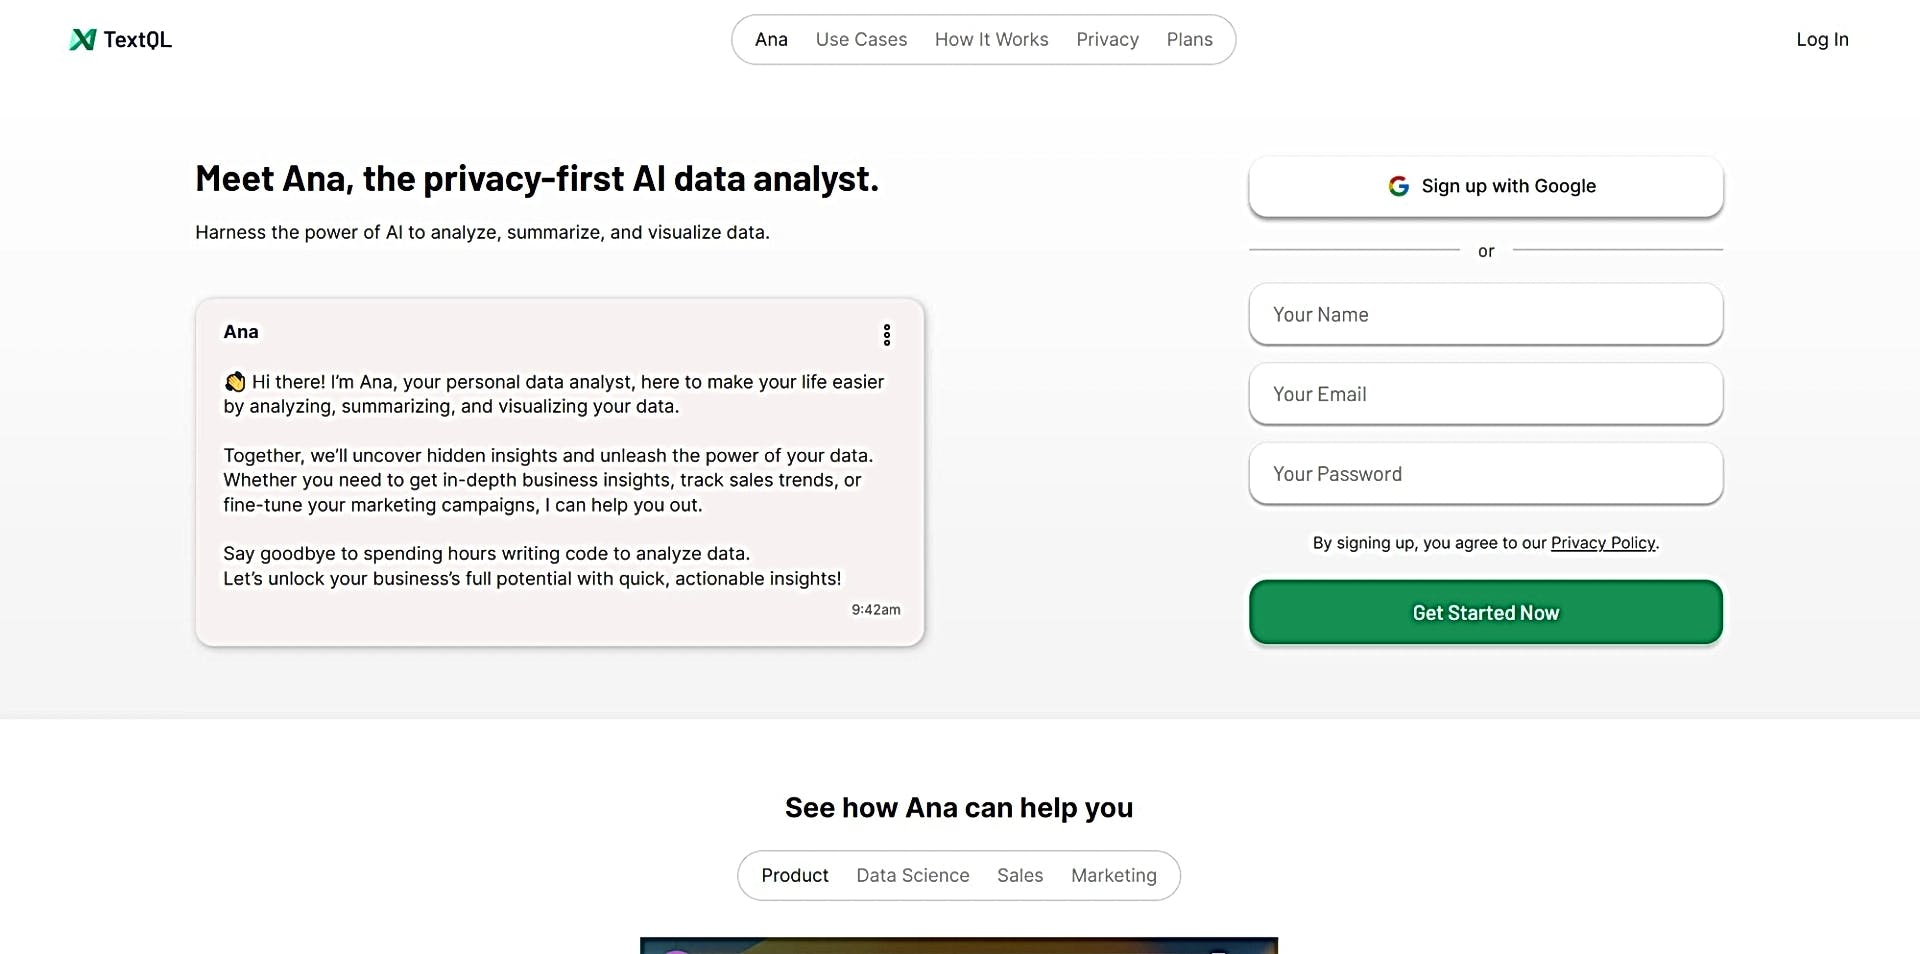 Ana by TextQL featured